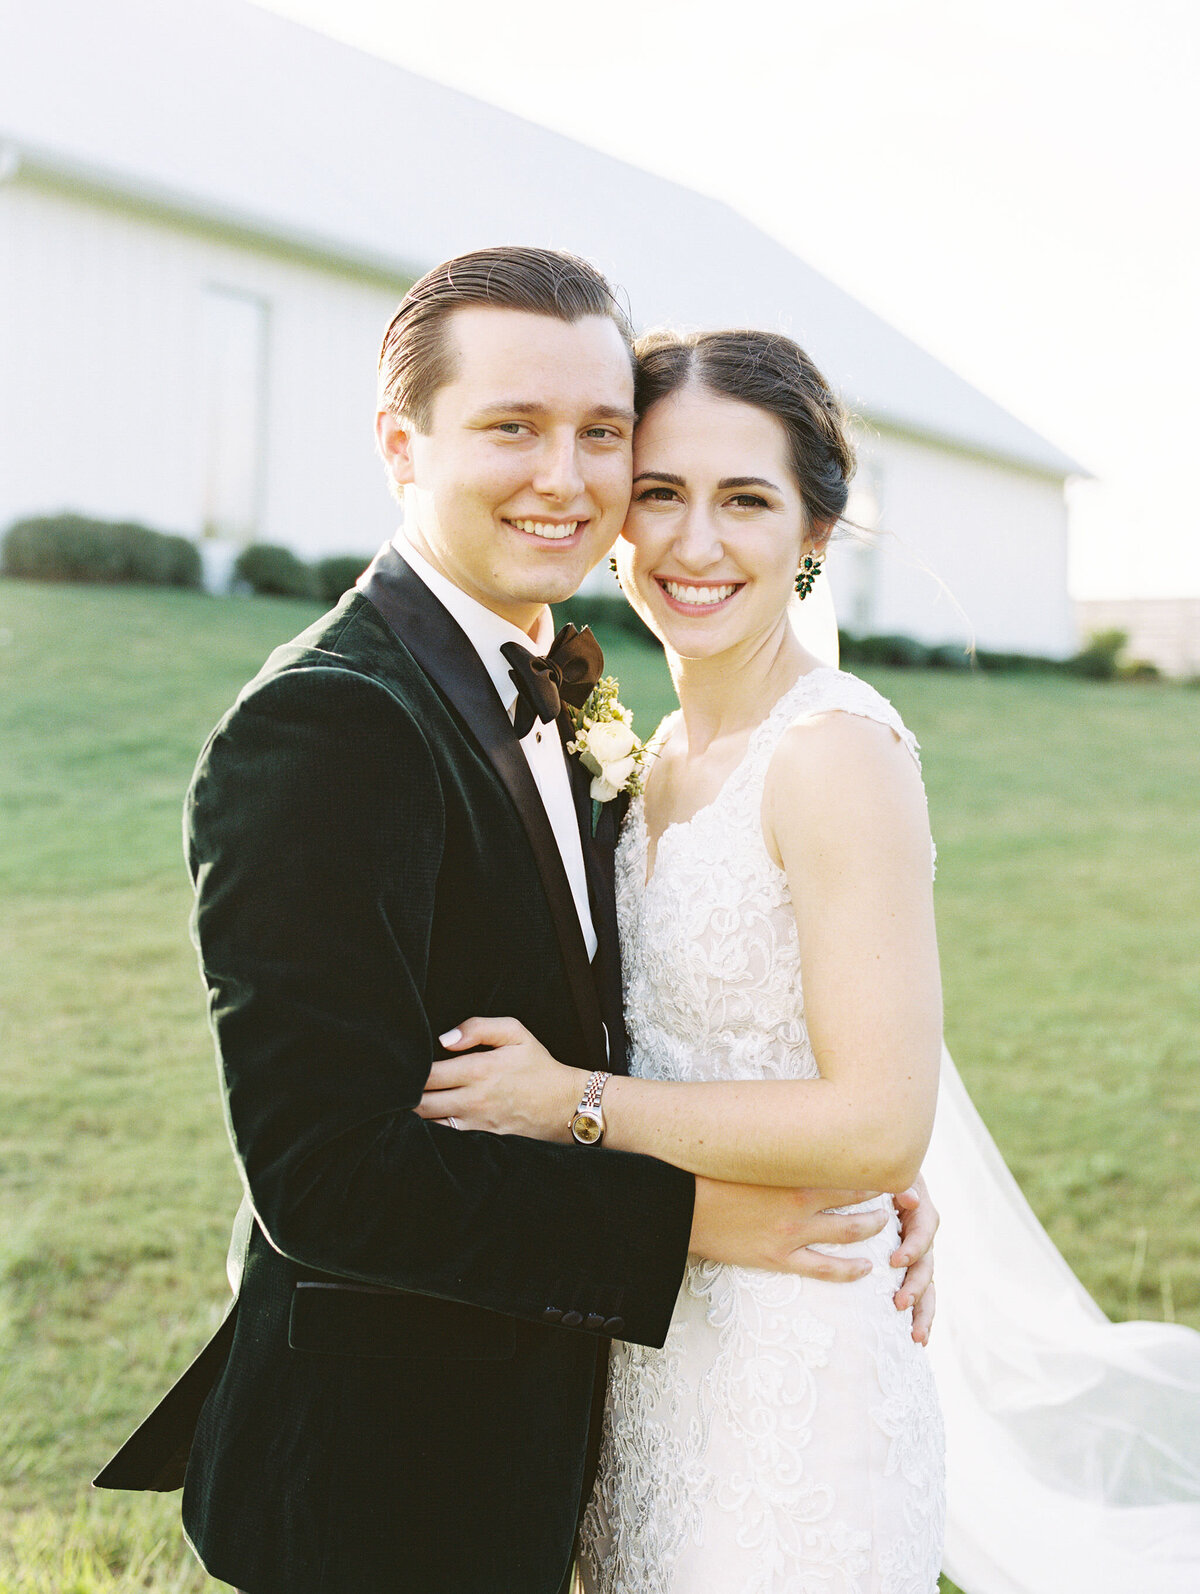 A Couple smiles at the camera at their wedding venue in Montgomery, TX called The Farmhouse